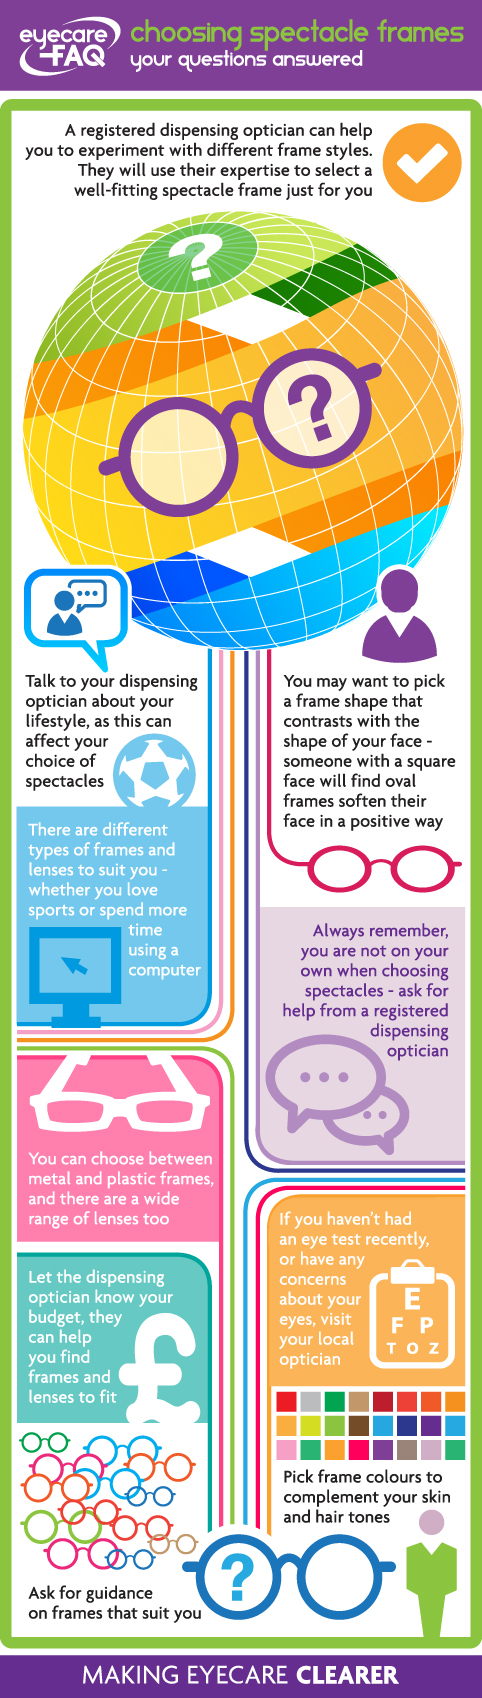 Choosing your Spectacle Frames